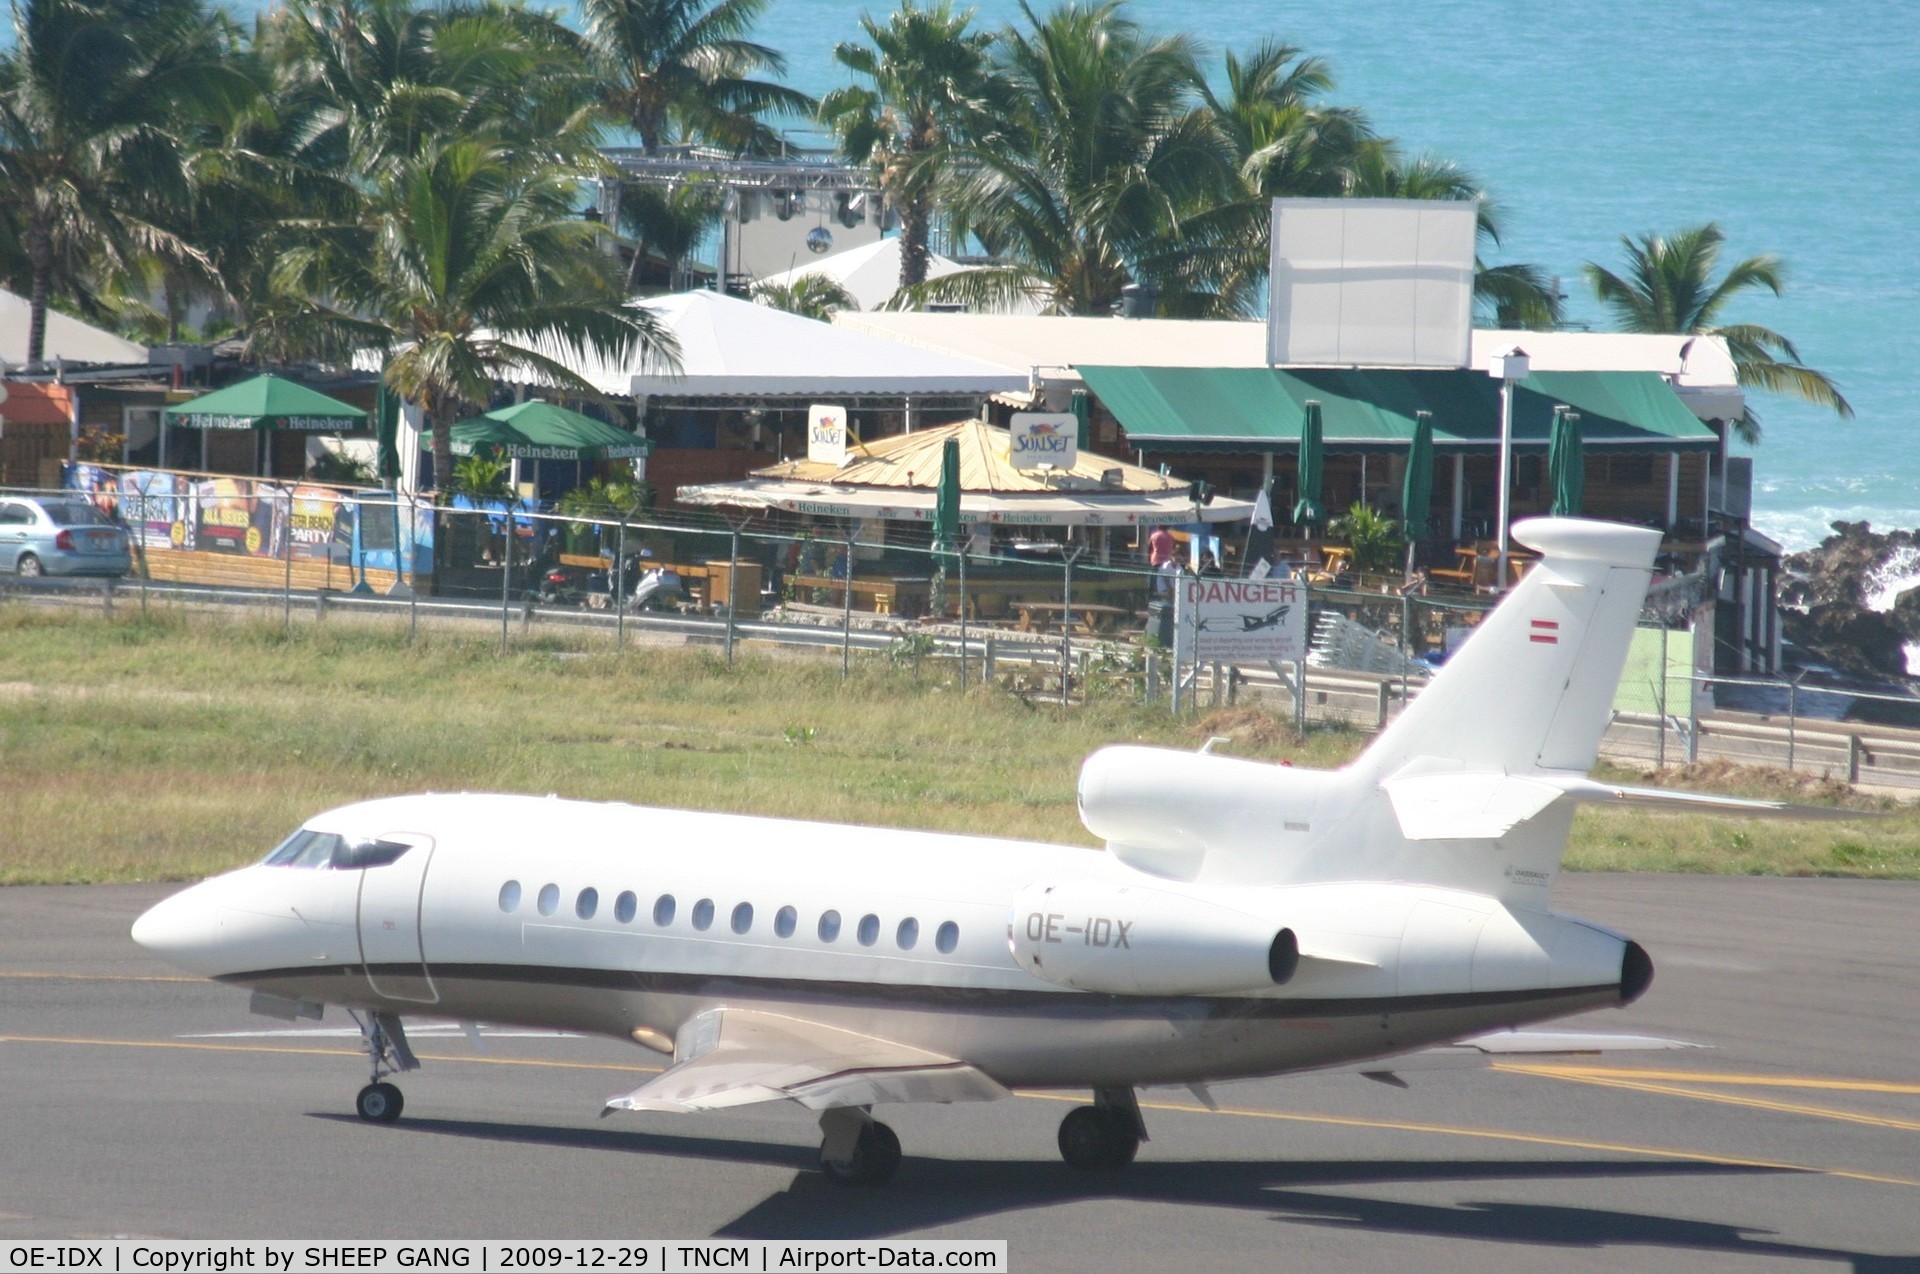 OE-IDX, 2006 Dassault Falcon 900DX C/N 604, The little bandit at the tresh hold for take off